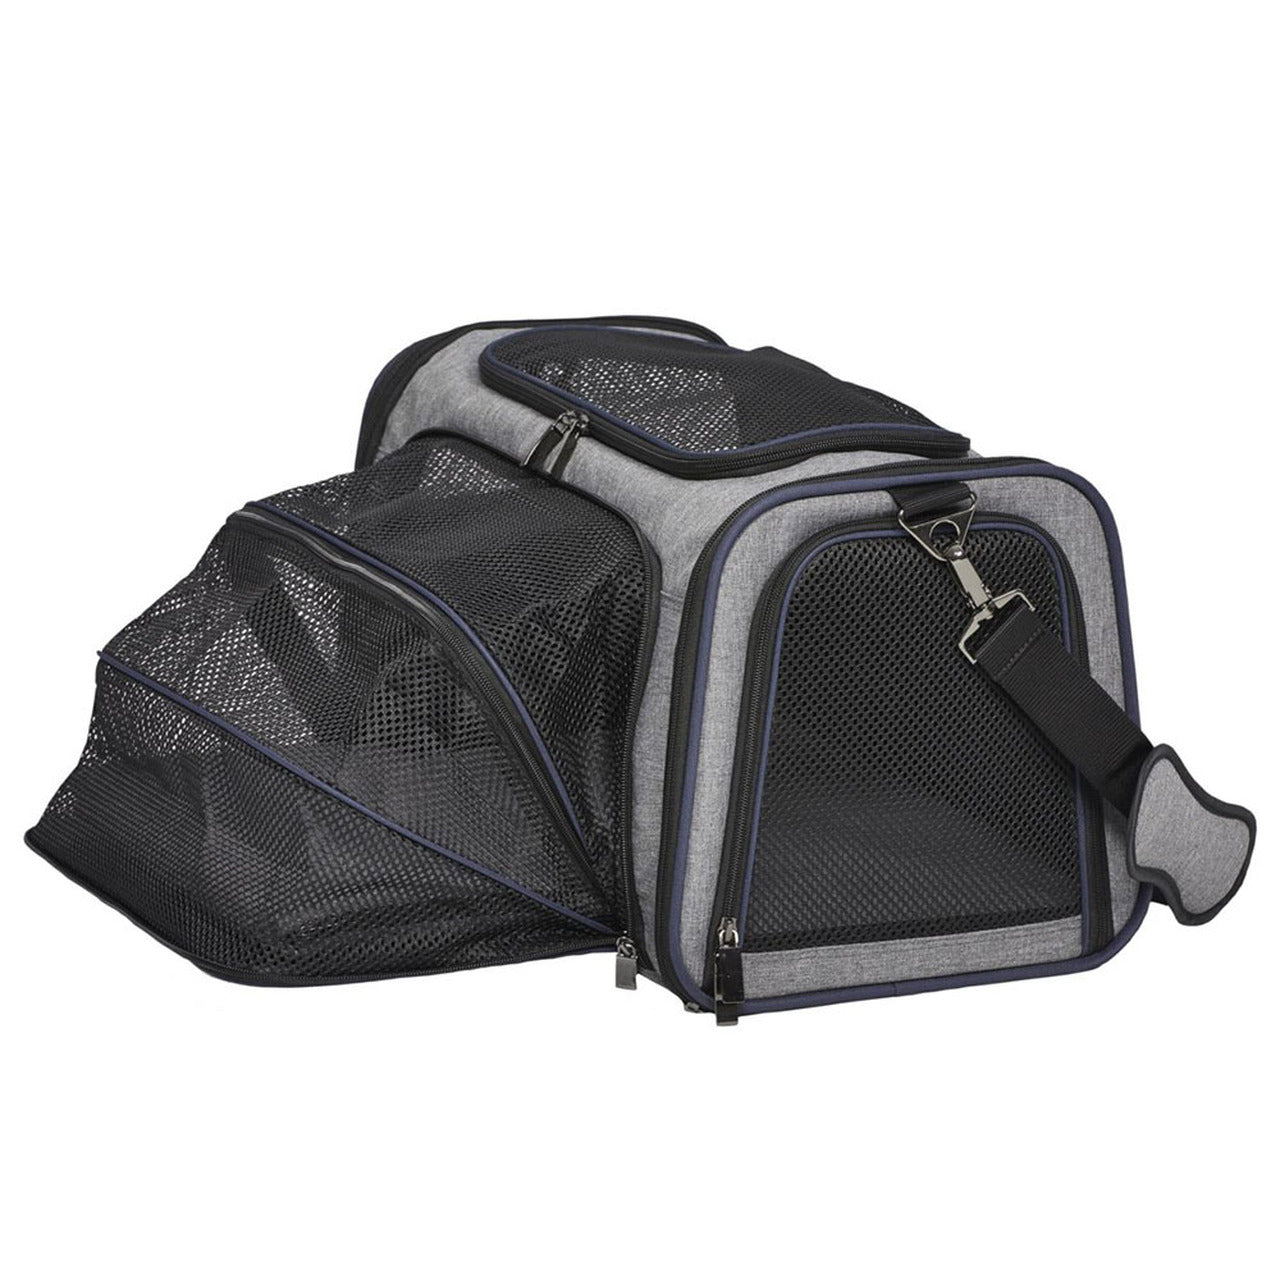 Midwest Duffy Pet Carrier Grey - Mutts & Co.